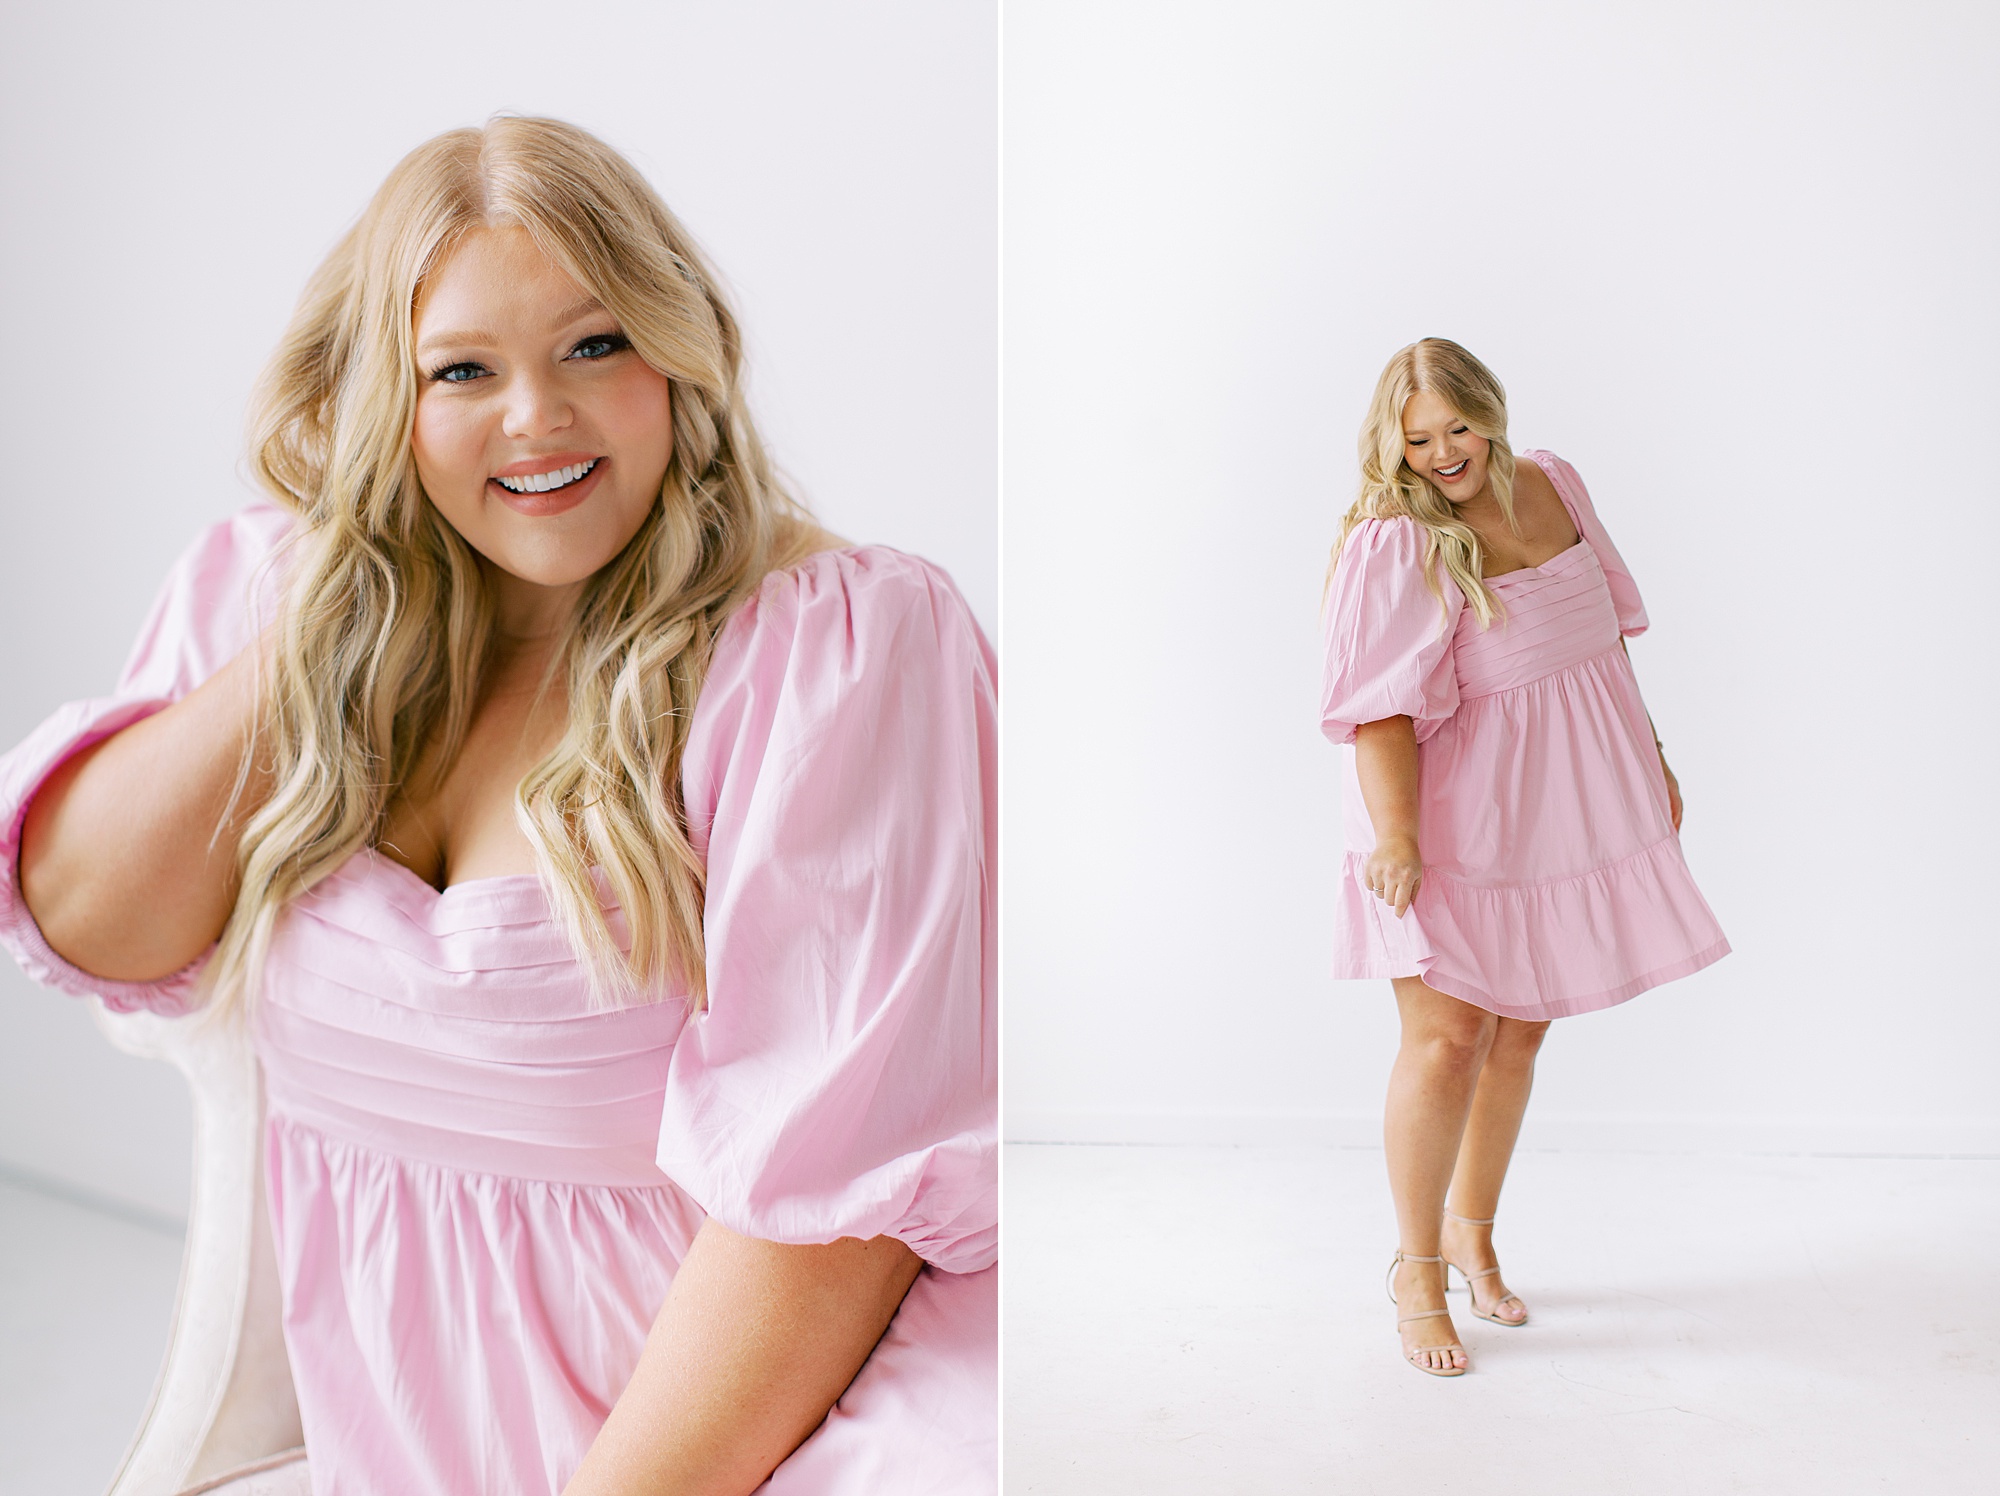 woman poses in pink dress during branding photos